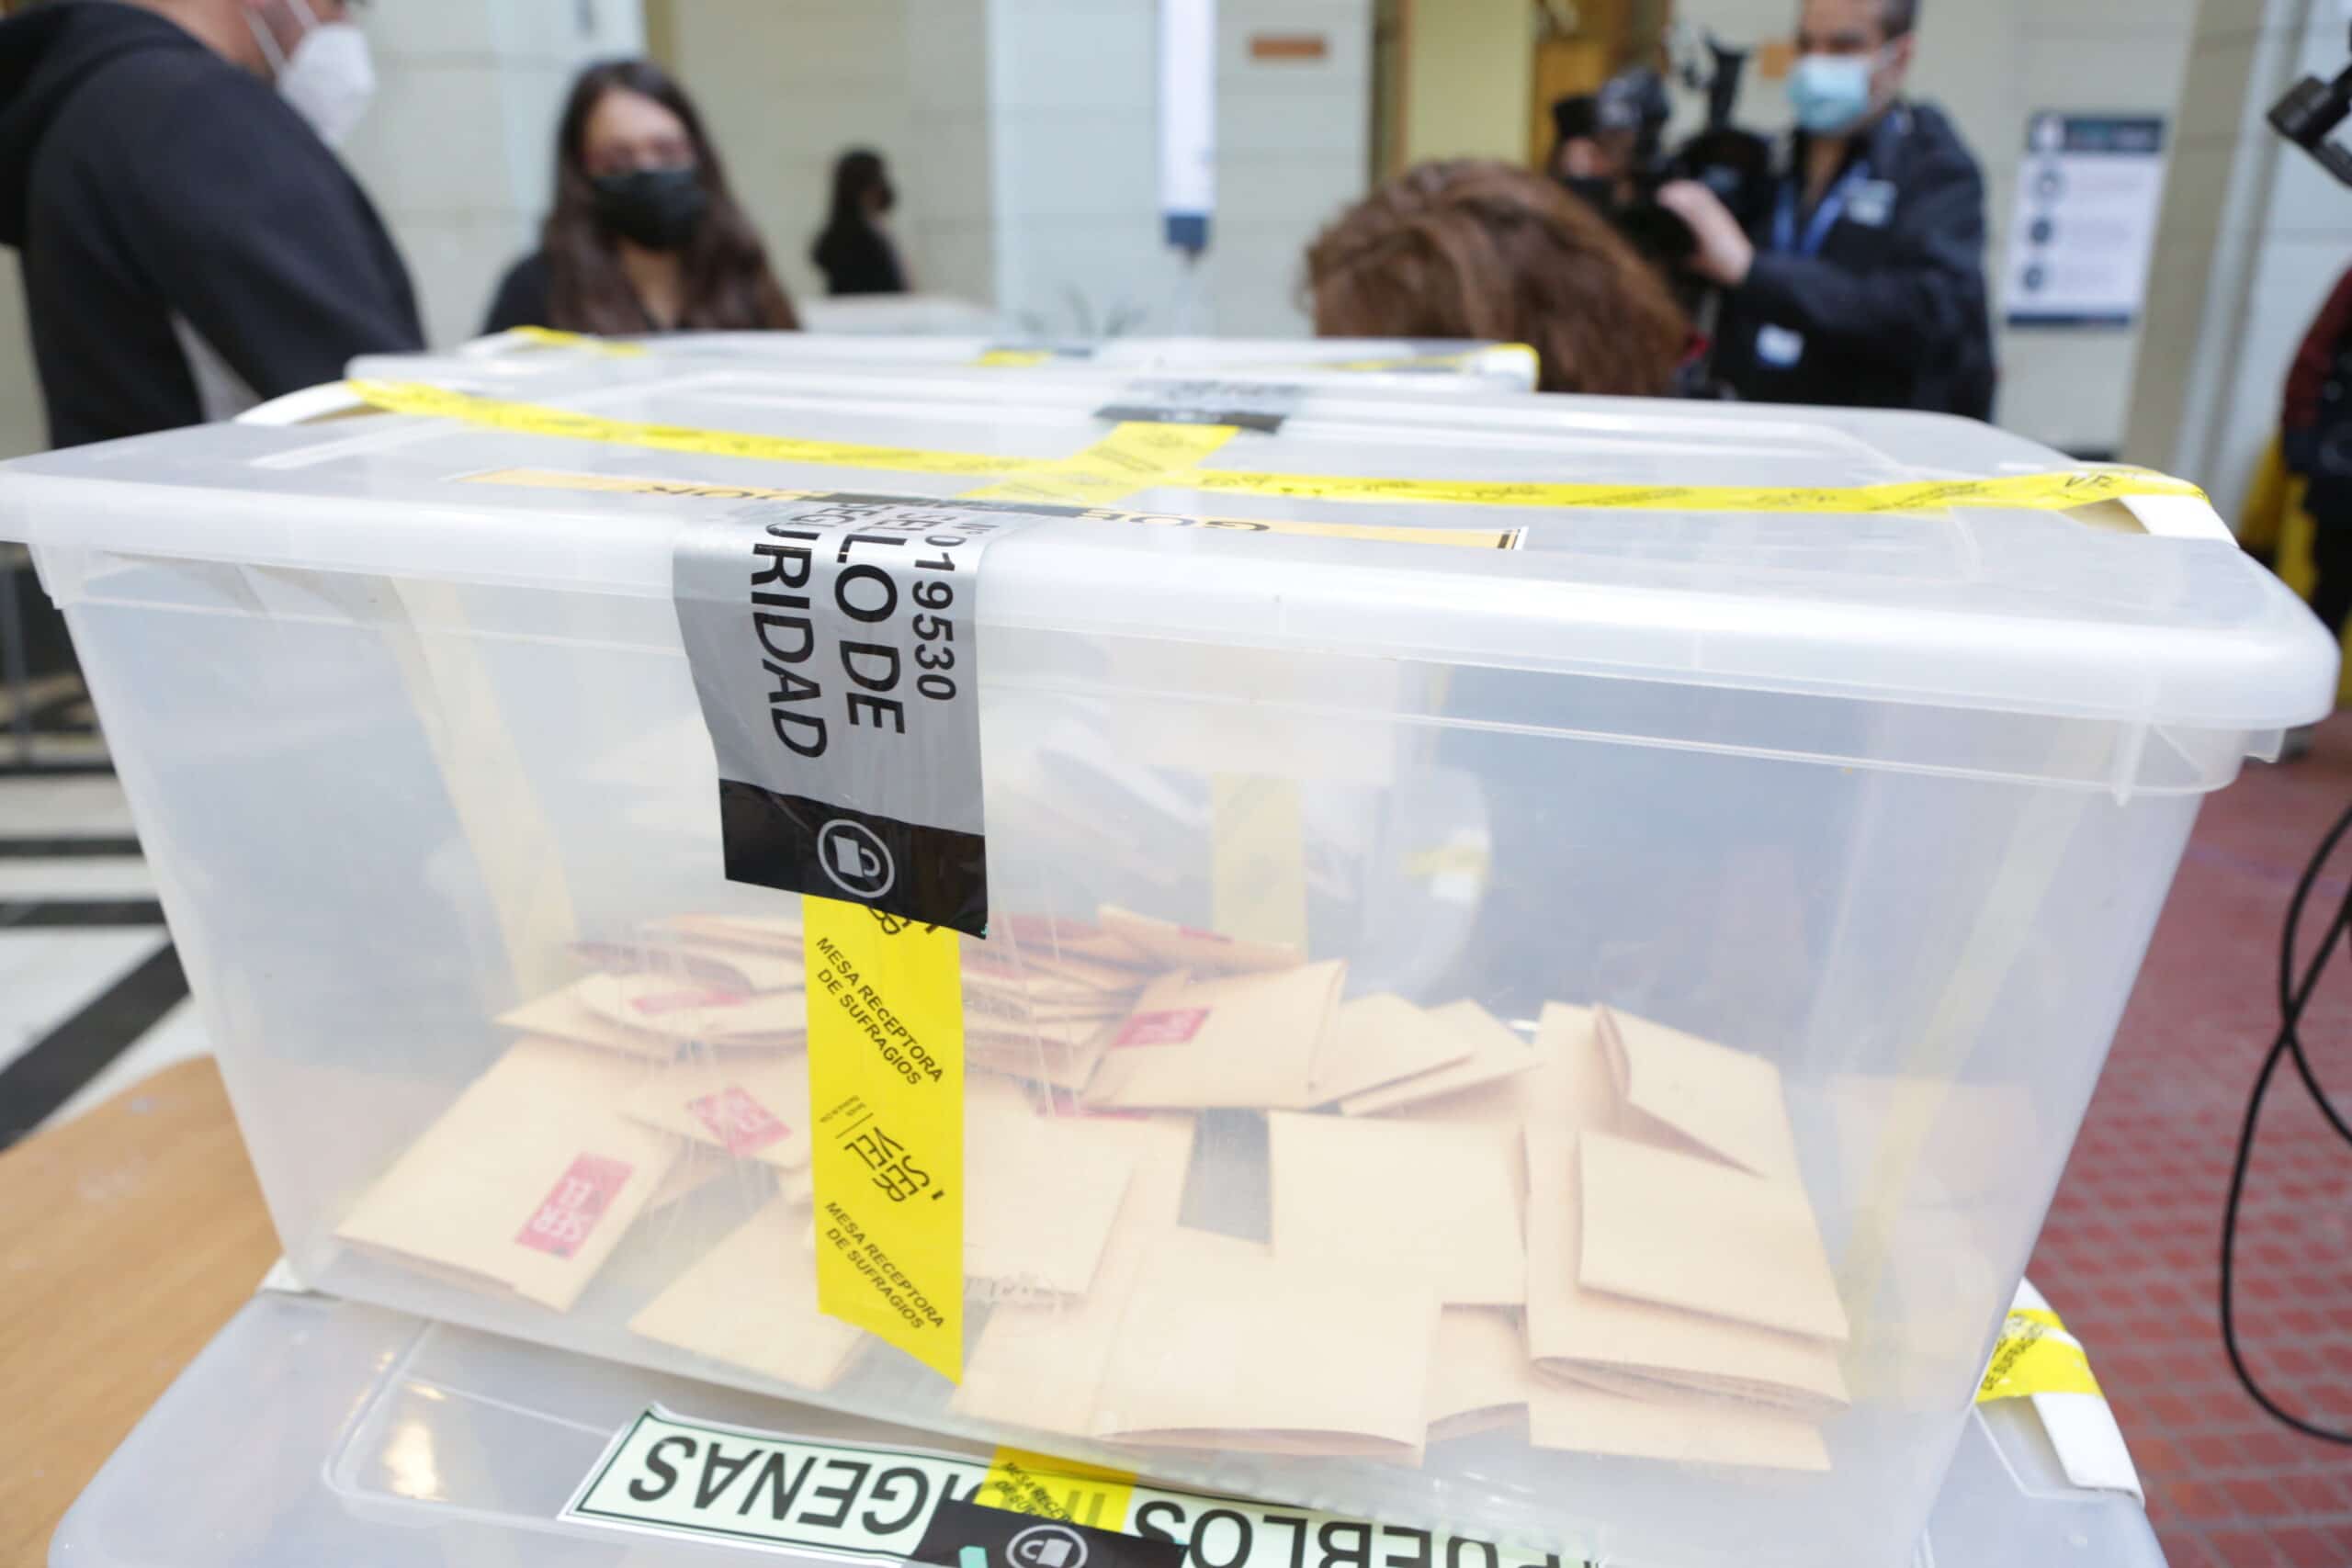 Featured image: A ballot boxes with all its seals to protect the vote but many complained about the lack of seals in most of voting places like in the image above. Photo courtesy of Servel Chile (@servelchile).